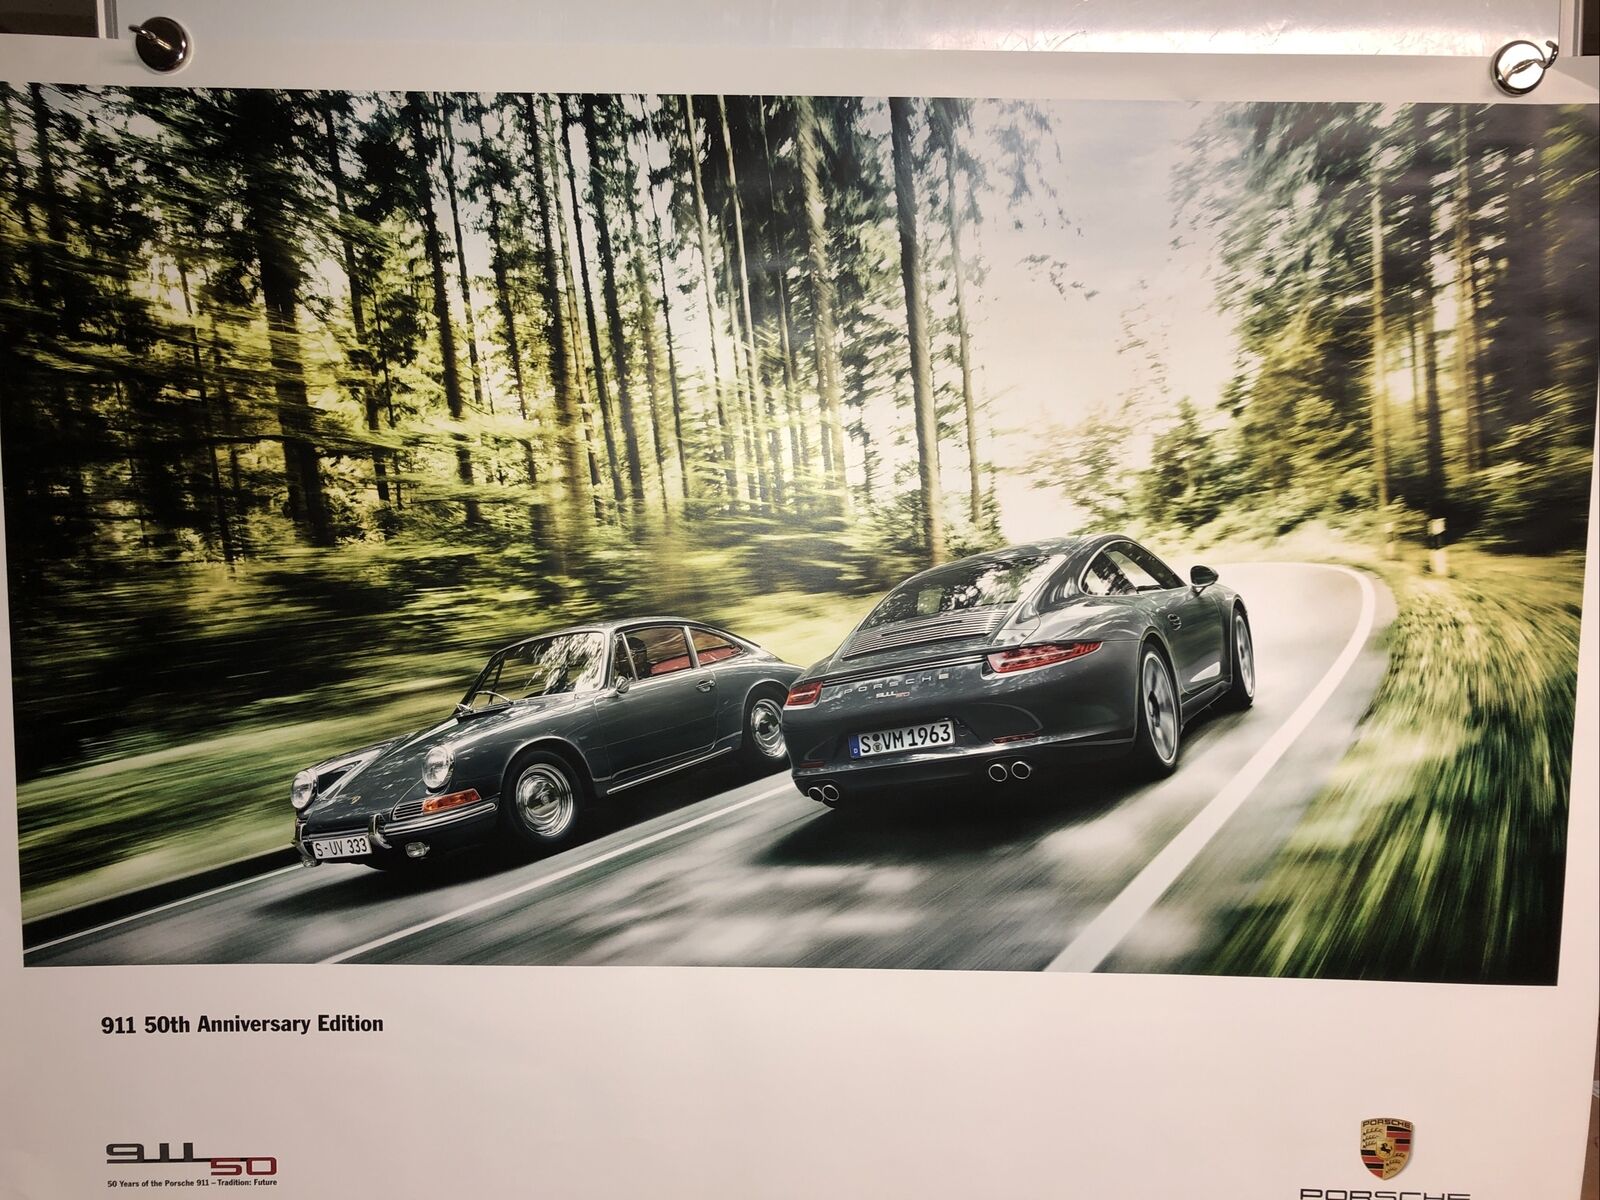 AWESOME 2013  Factory Vintage Porsche Poster 911 50th Anniversary Edition